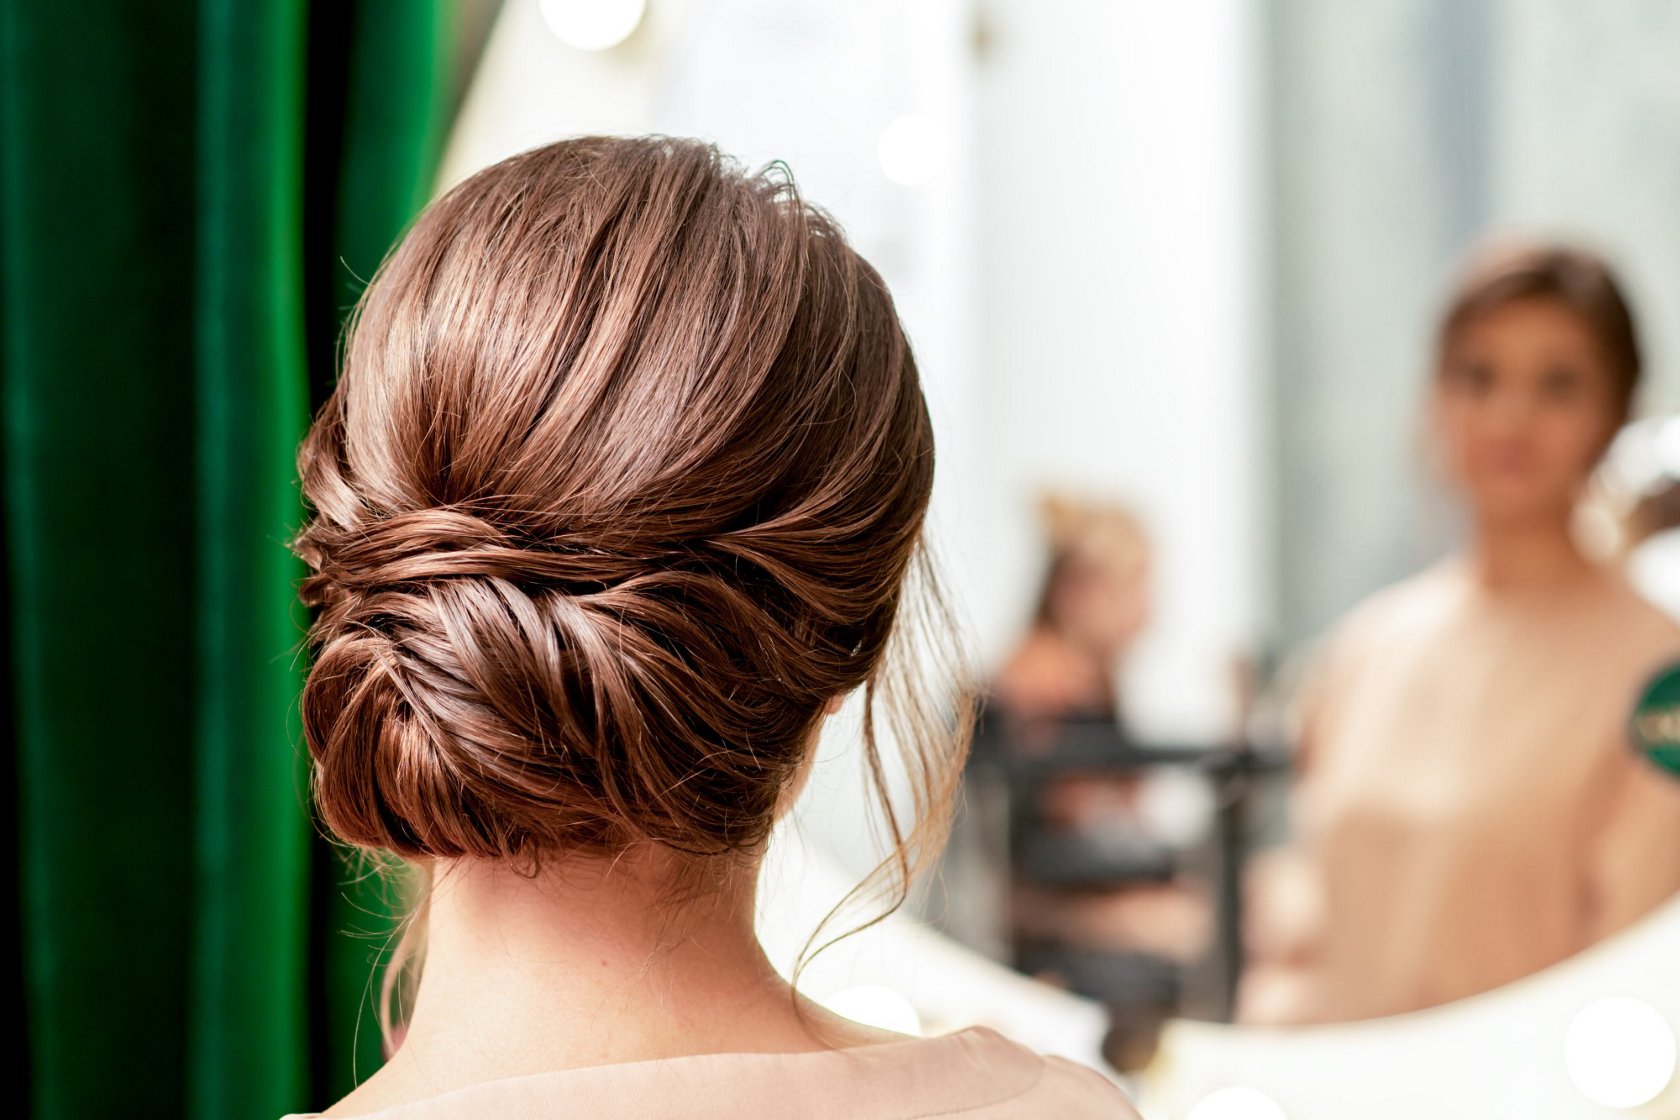 prom hairstyles for long hair updos